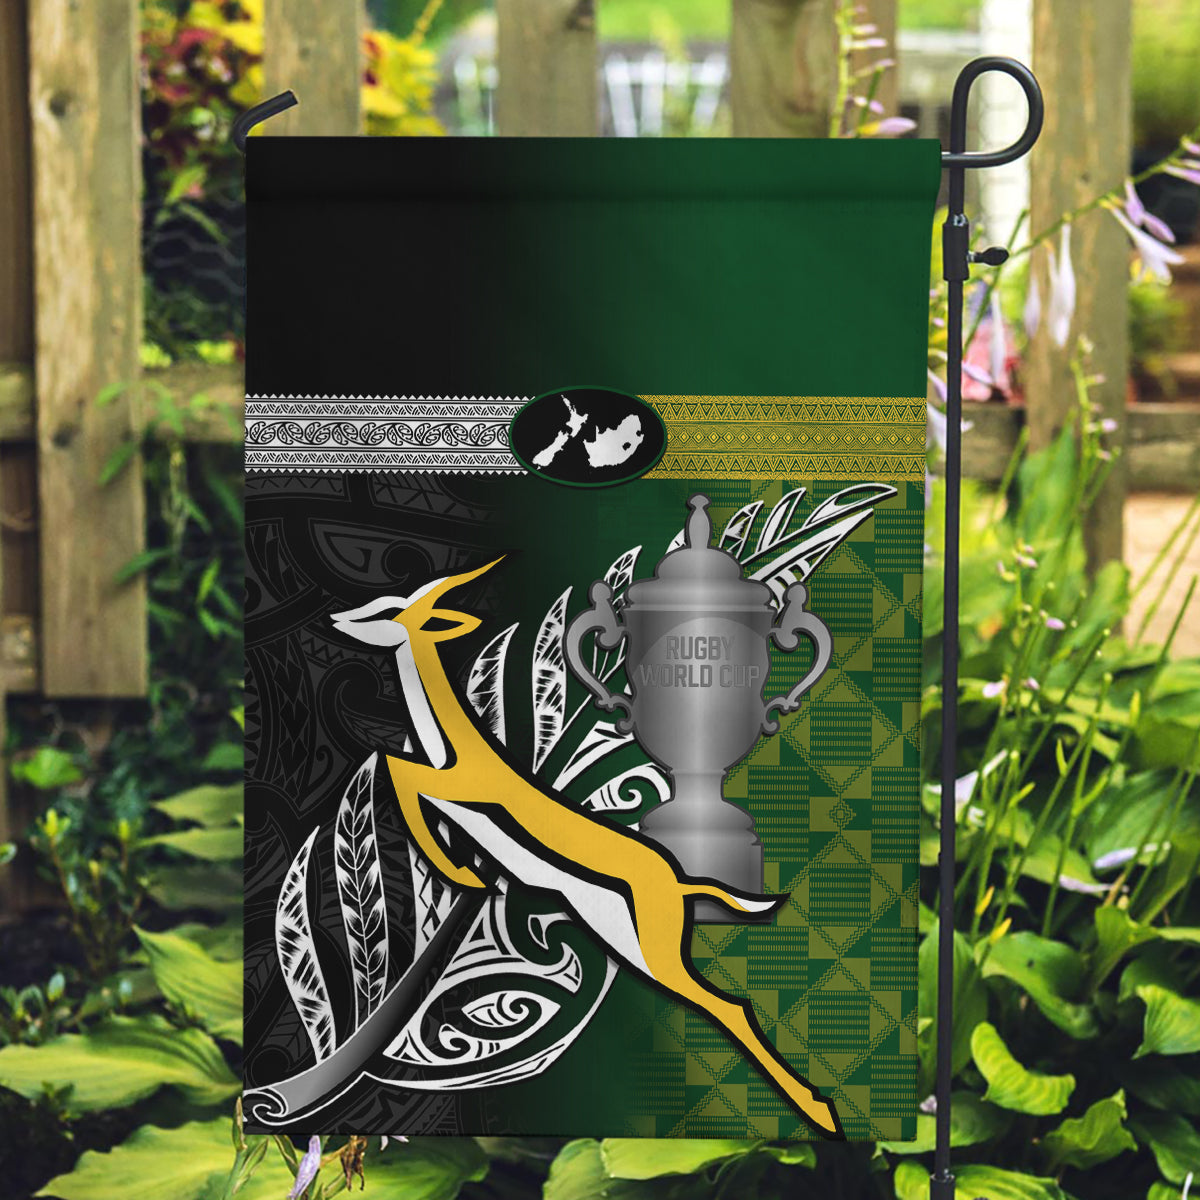 New Zealand and South Africa Rugby Garden Flag 2023 World Cup Final All Black Springboks Together LT14 Garden Flag Black - Polynesian Pride